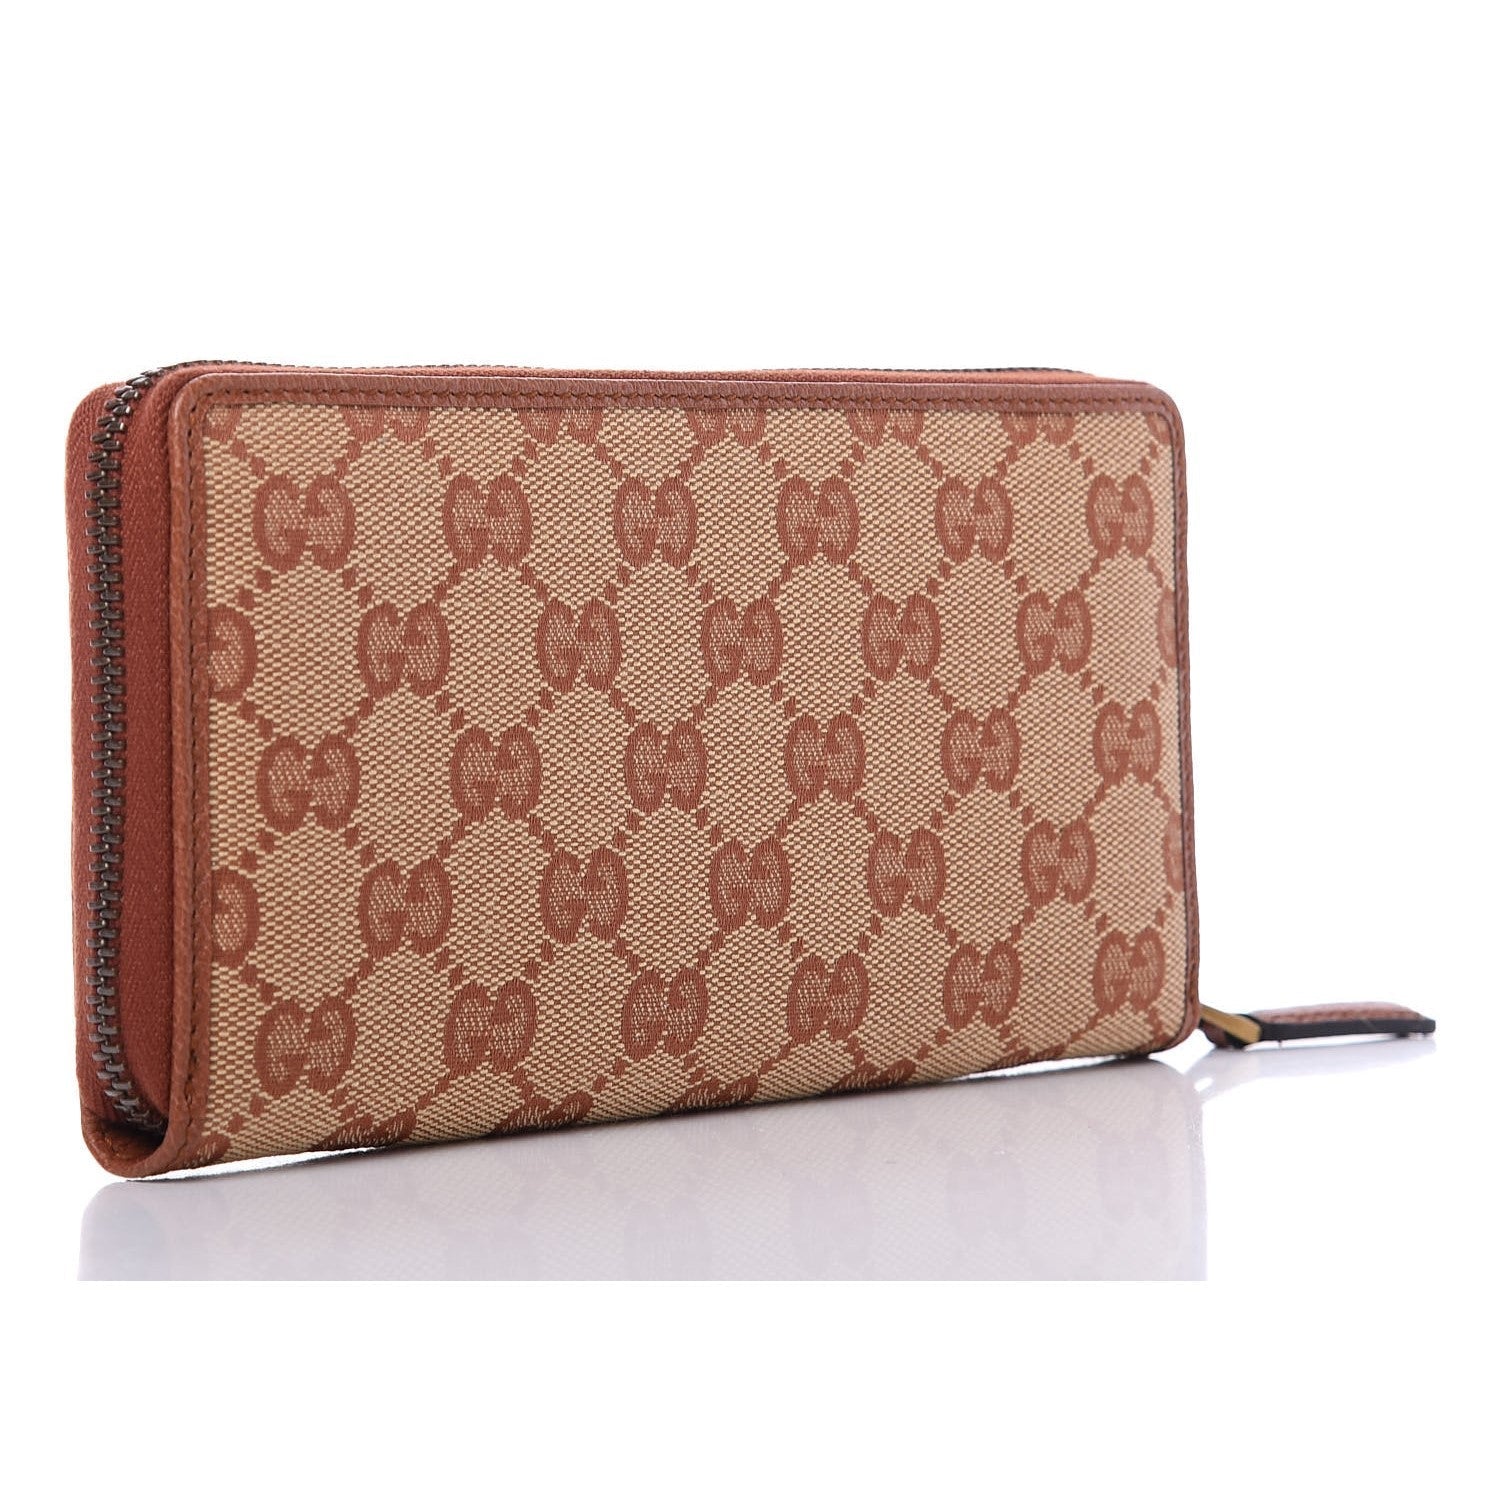 Gucci Monogram NY Yankees Canvas Guccisima Zip Around Wallet 547791 at_Queen_Bee_of_Beverly_Hills